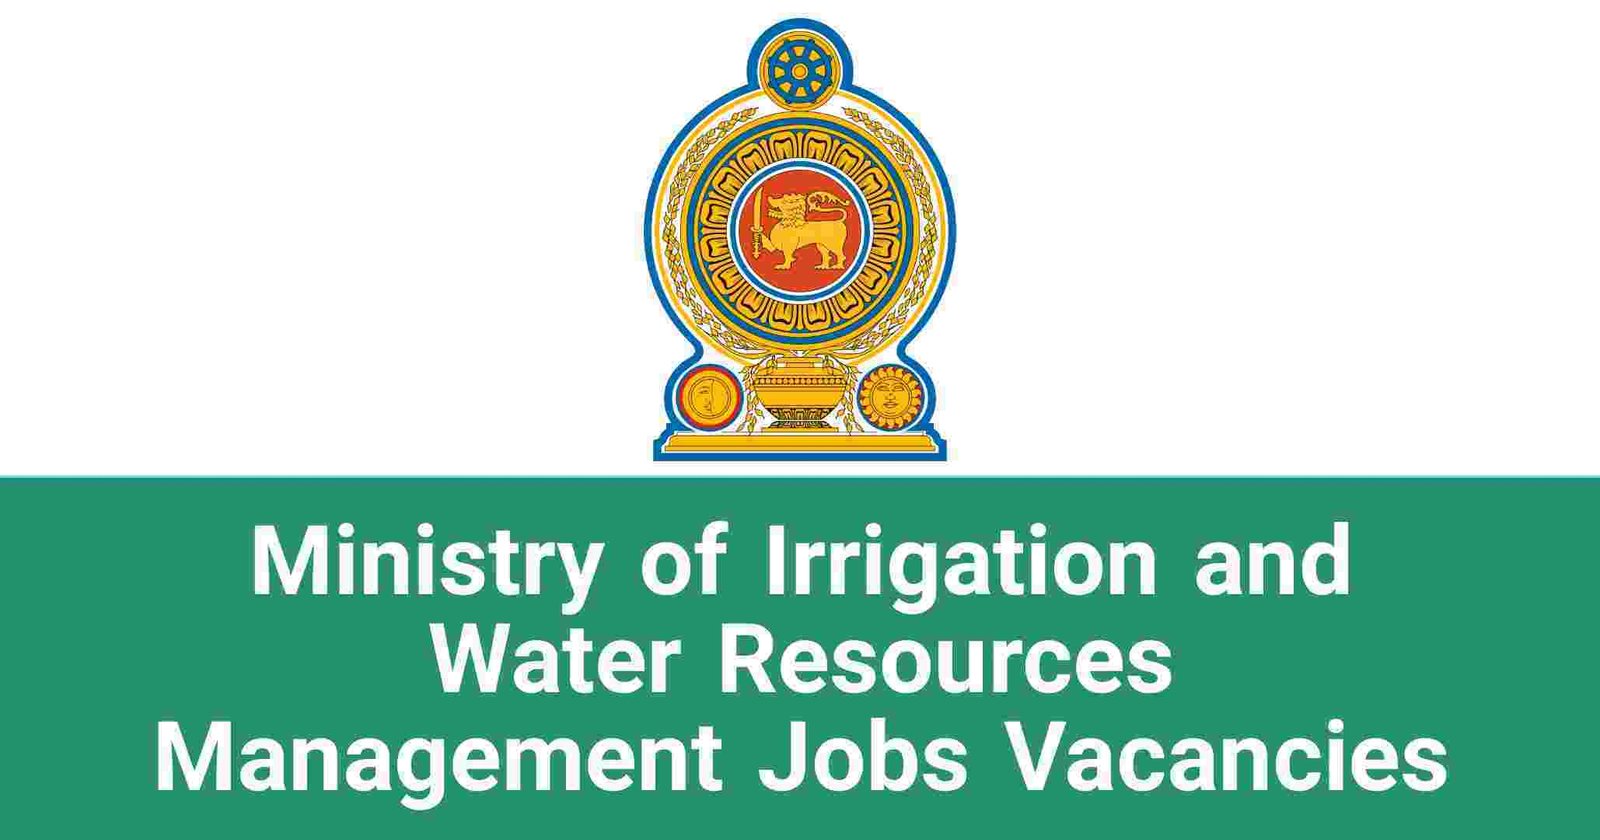 Ministry of Irrigation and Water Resources Management Jobs Vacancies